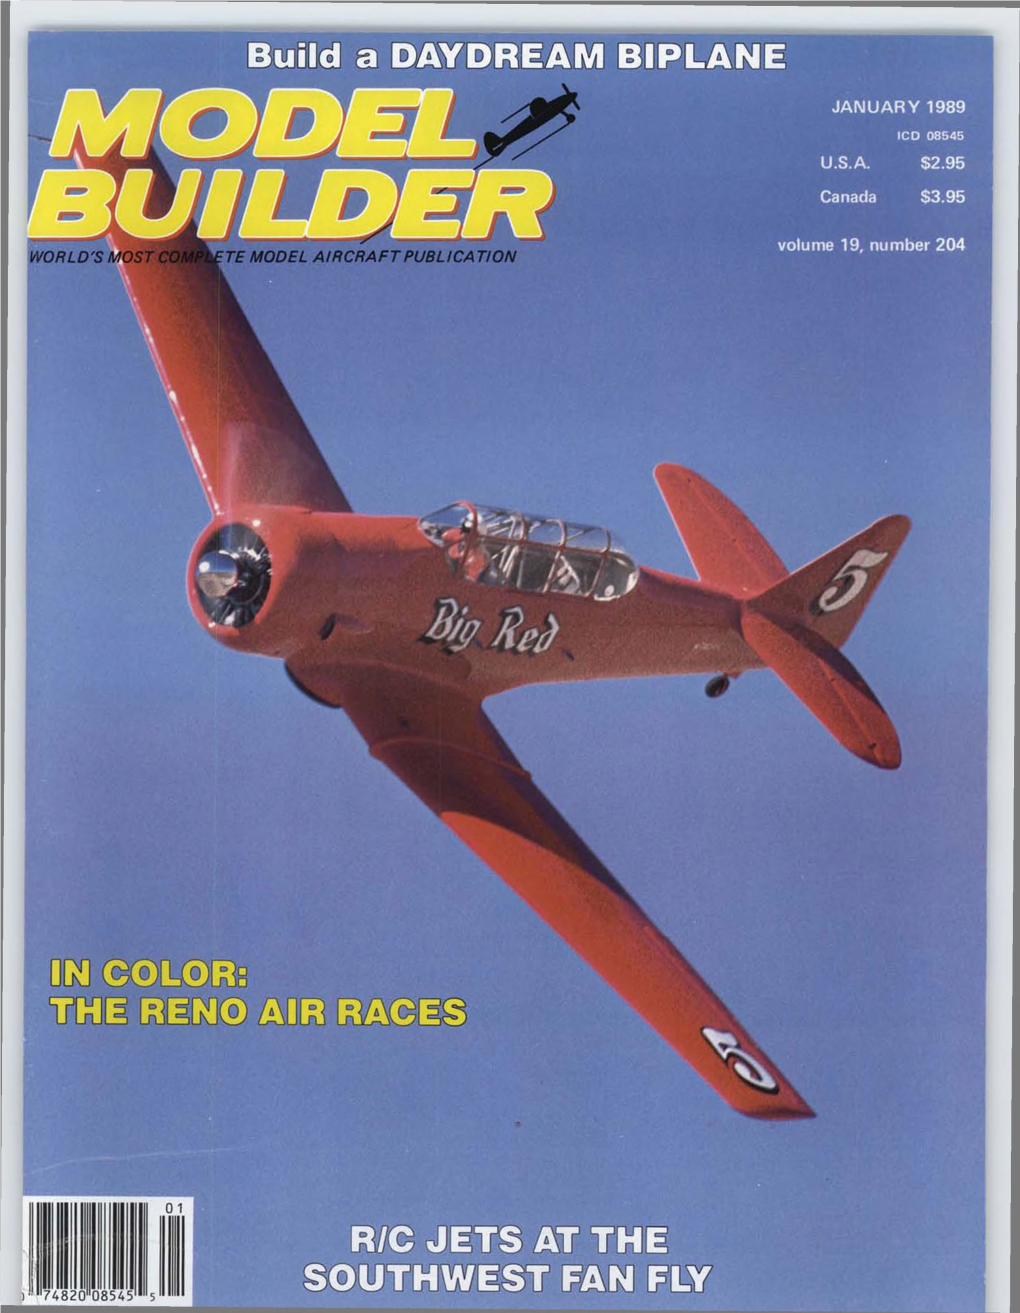 MODEL BUILDER JANUARY 1989 FULL-SIZE PLANS AVAILABLE-SEE PAGE 106 21 Lower Wing Prior to Adding Dihedral